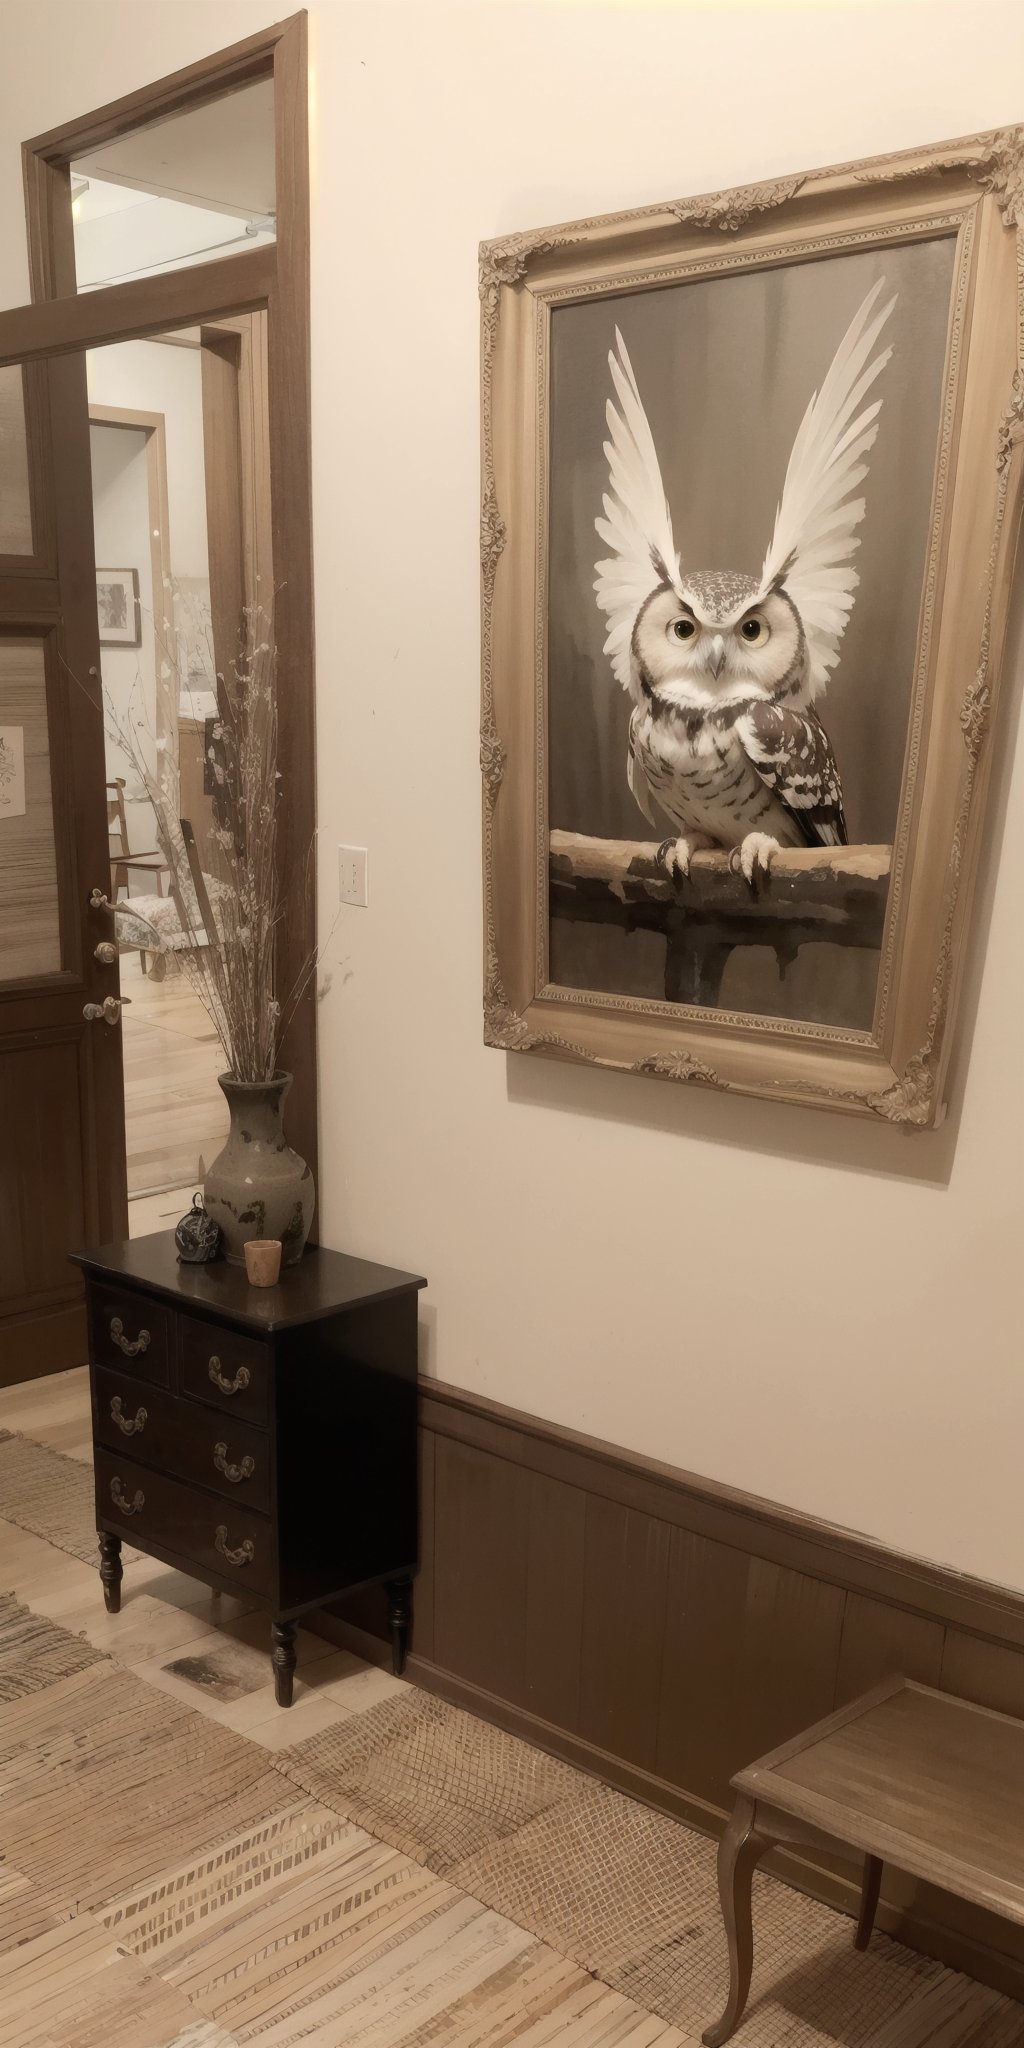 sepia color, myths of another world,Nostalogic atmosphere, pagan style graffiti art, Inside the secondhand store, framed paintings, furniture, pots, and a proud owl. watercolor \(medium\),